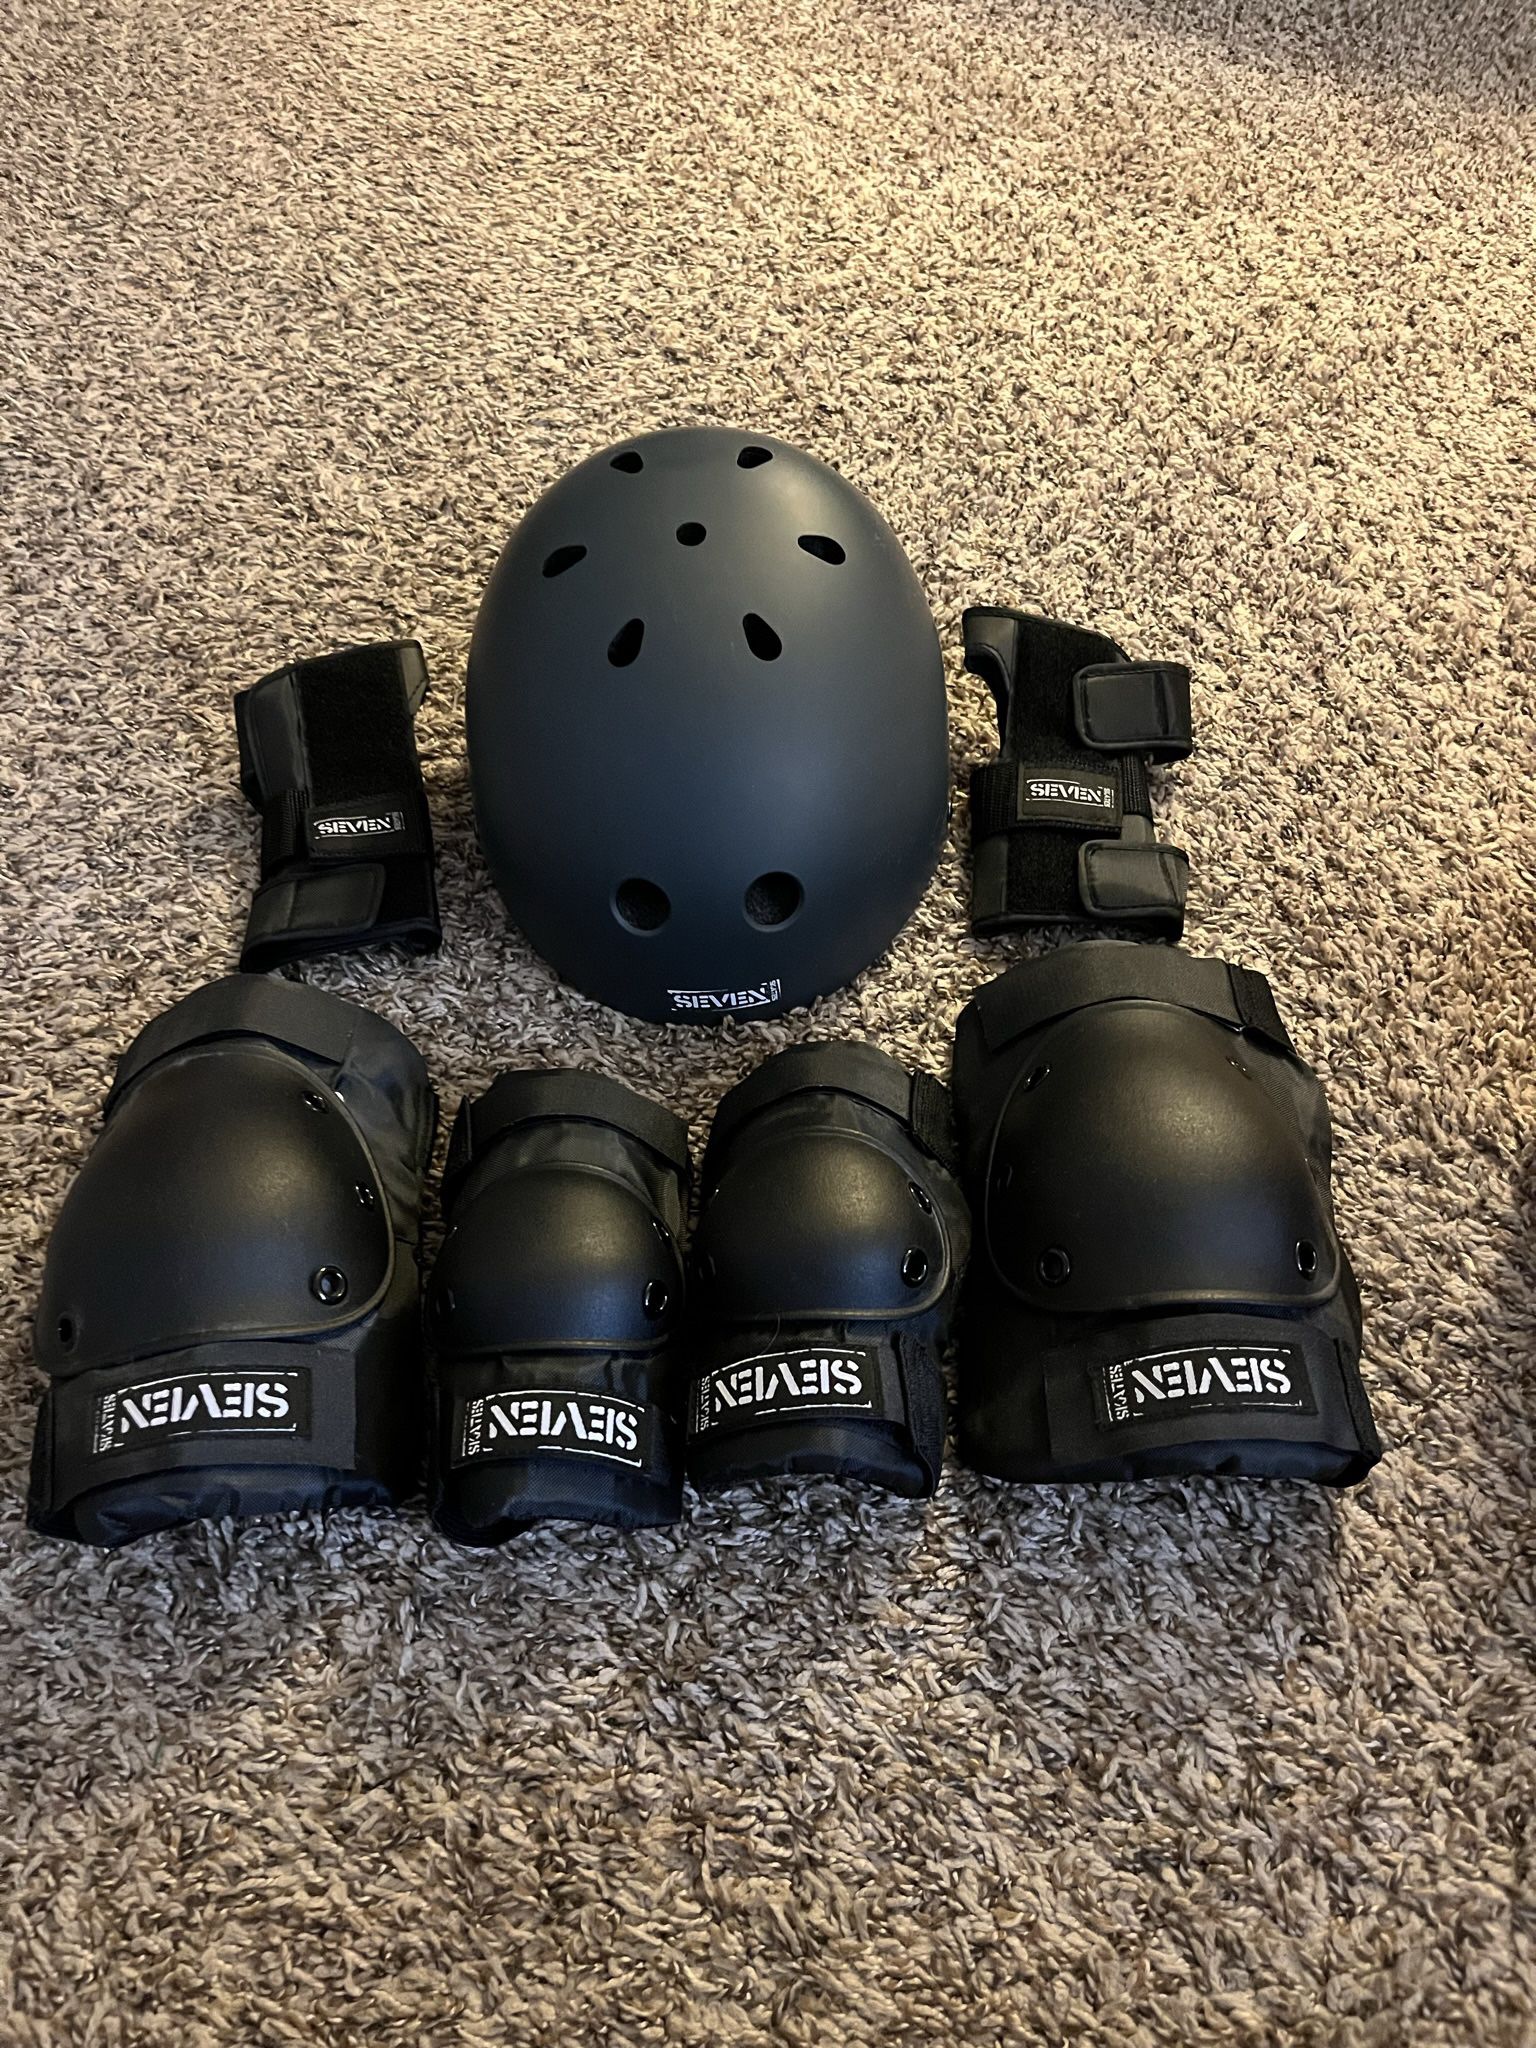 Youth Helmet And Protective Gear